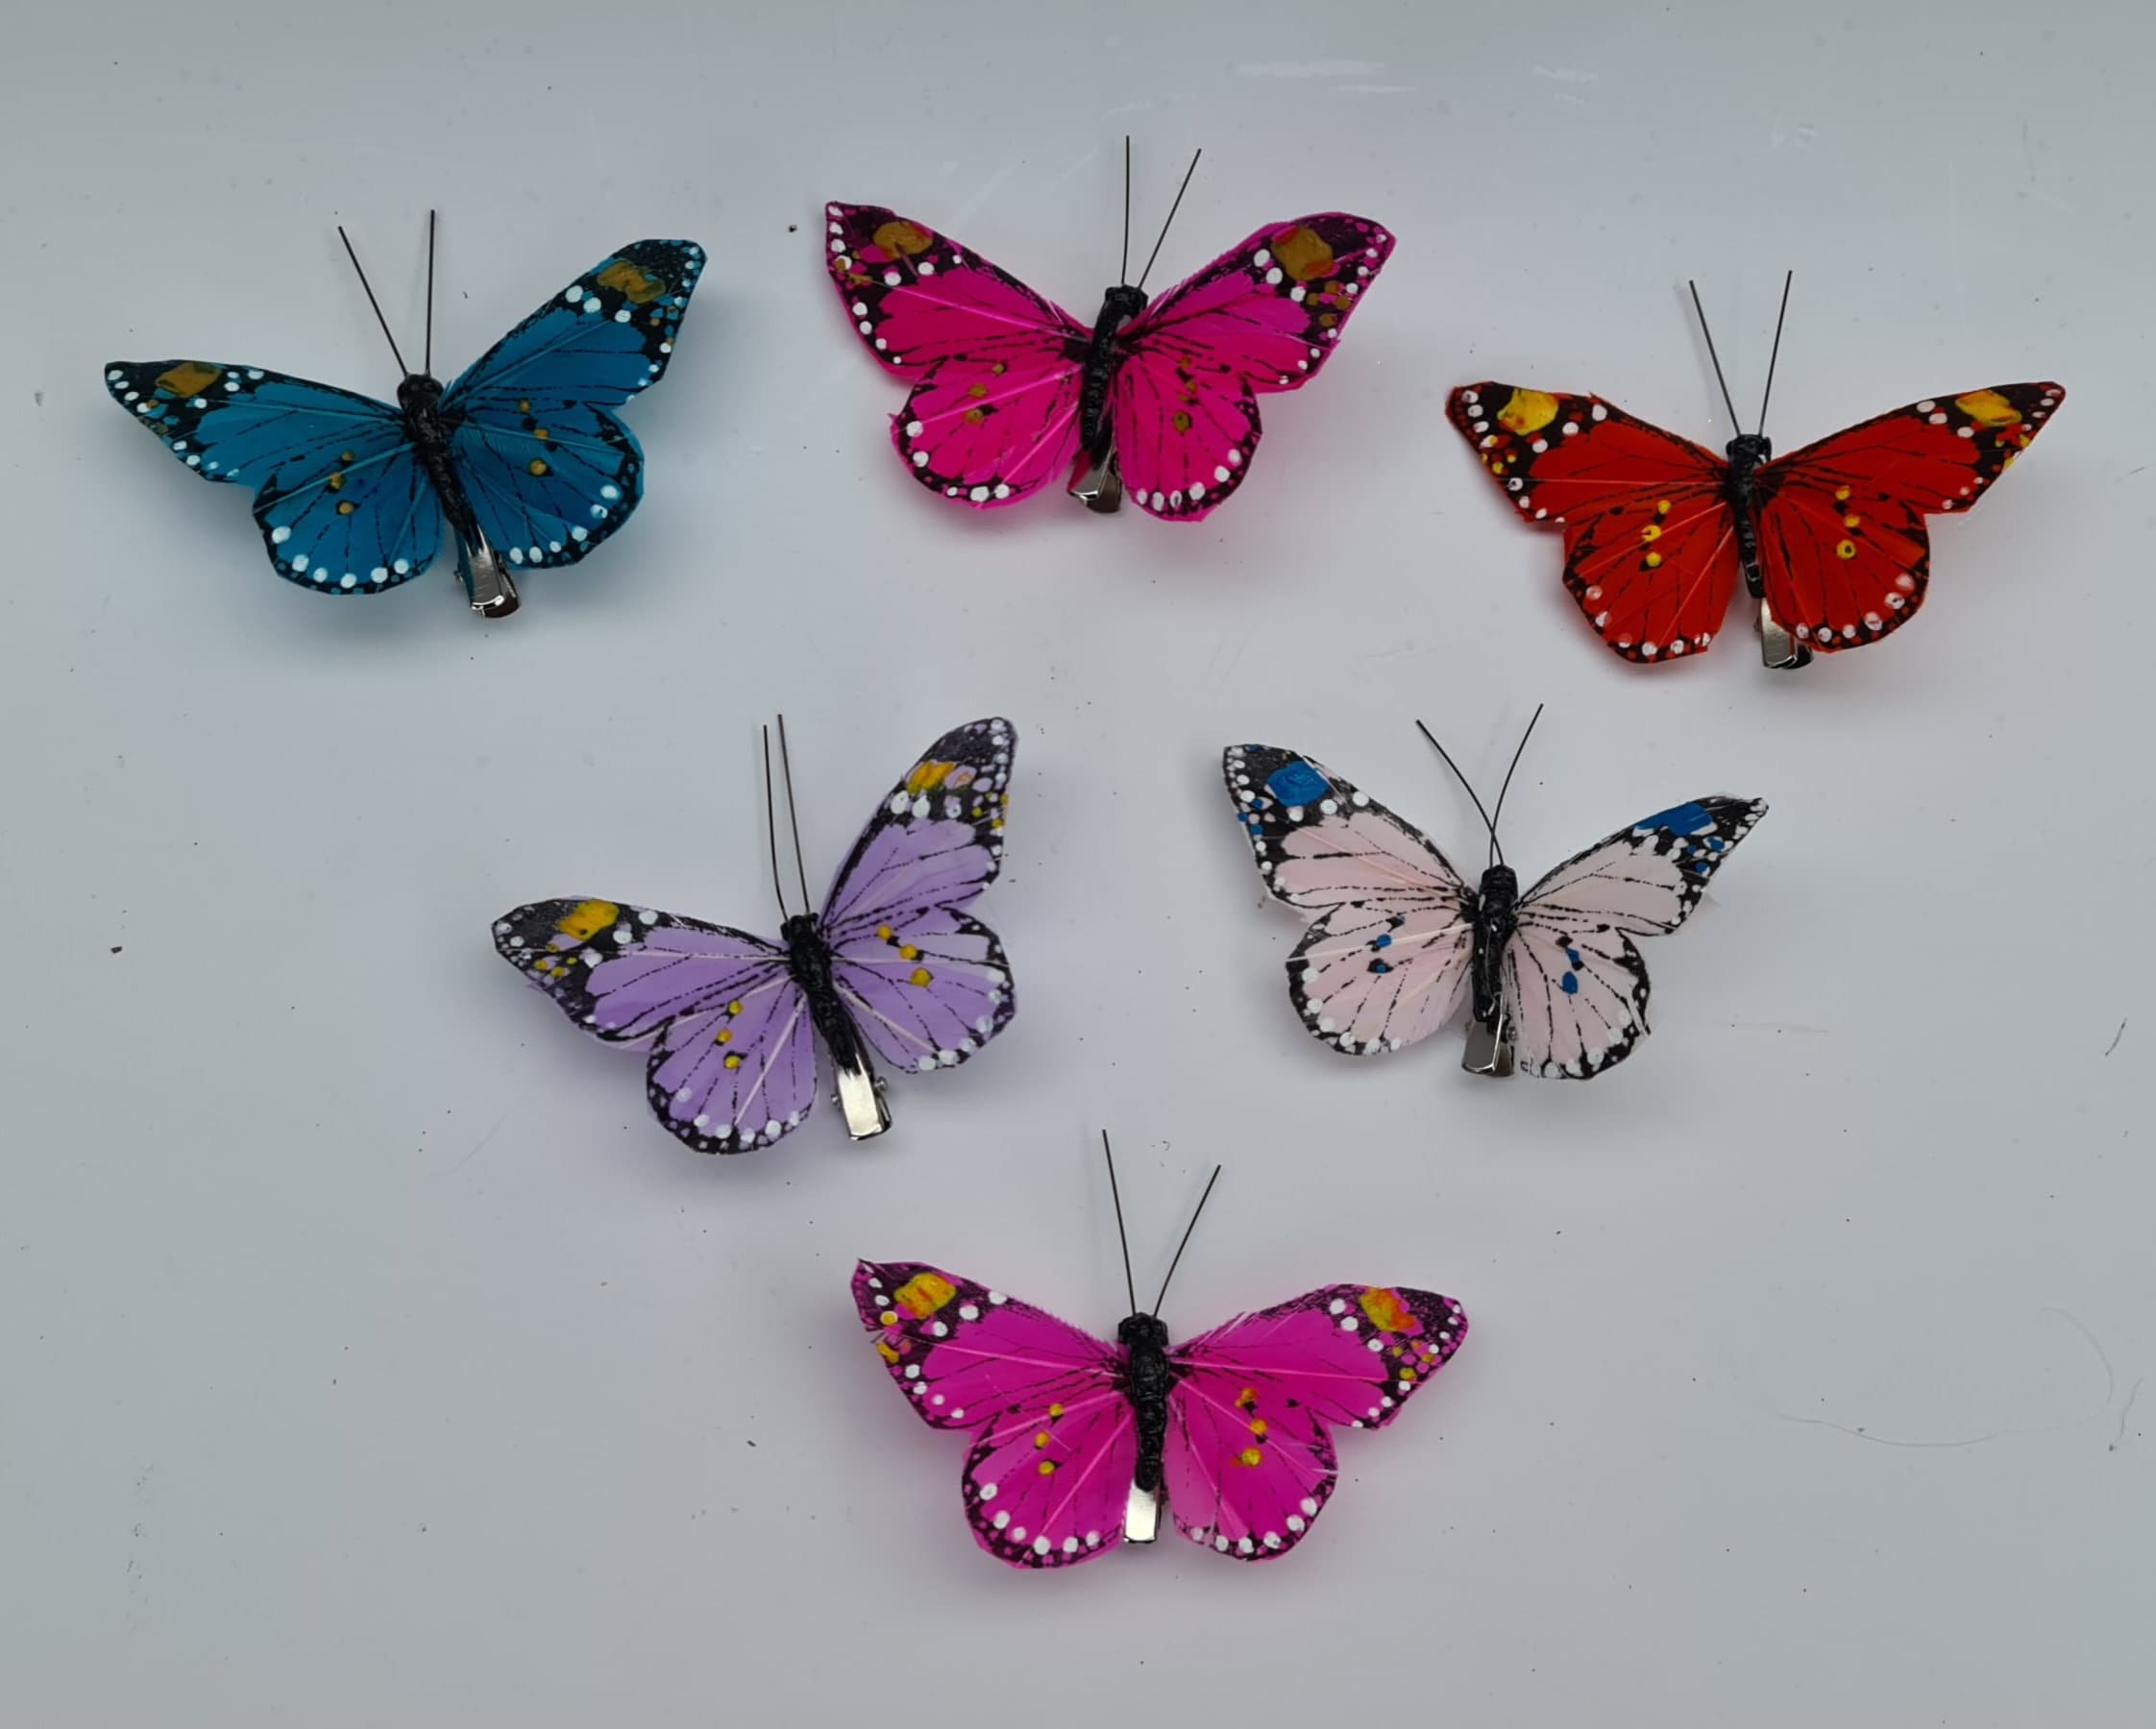 Feather Fake Butterfly for Craft Decoration Set of 12 with Clip